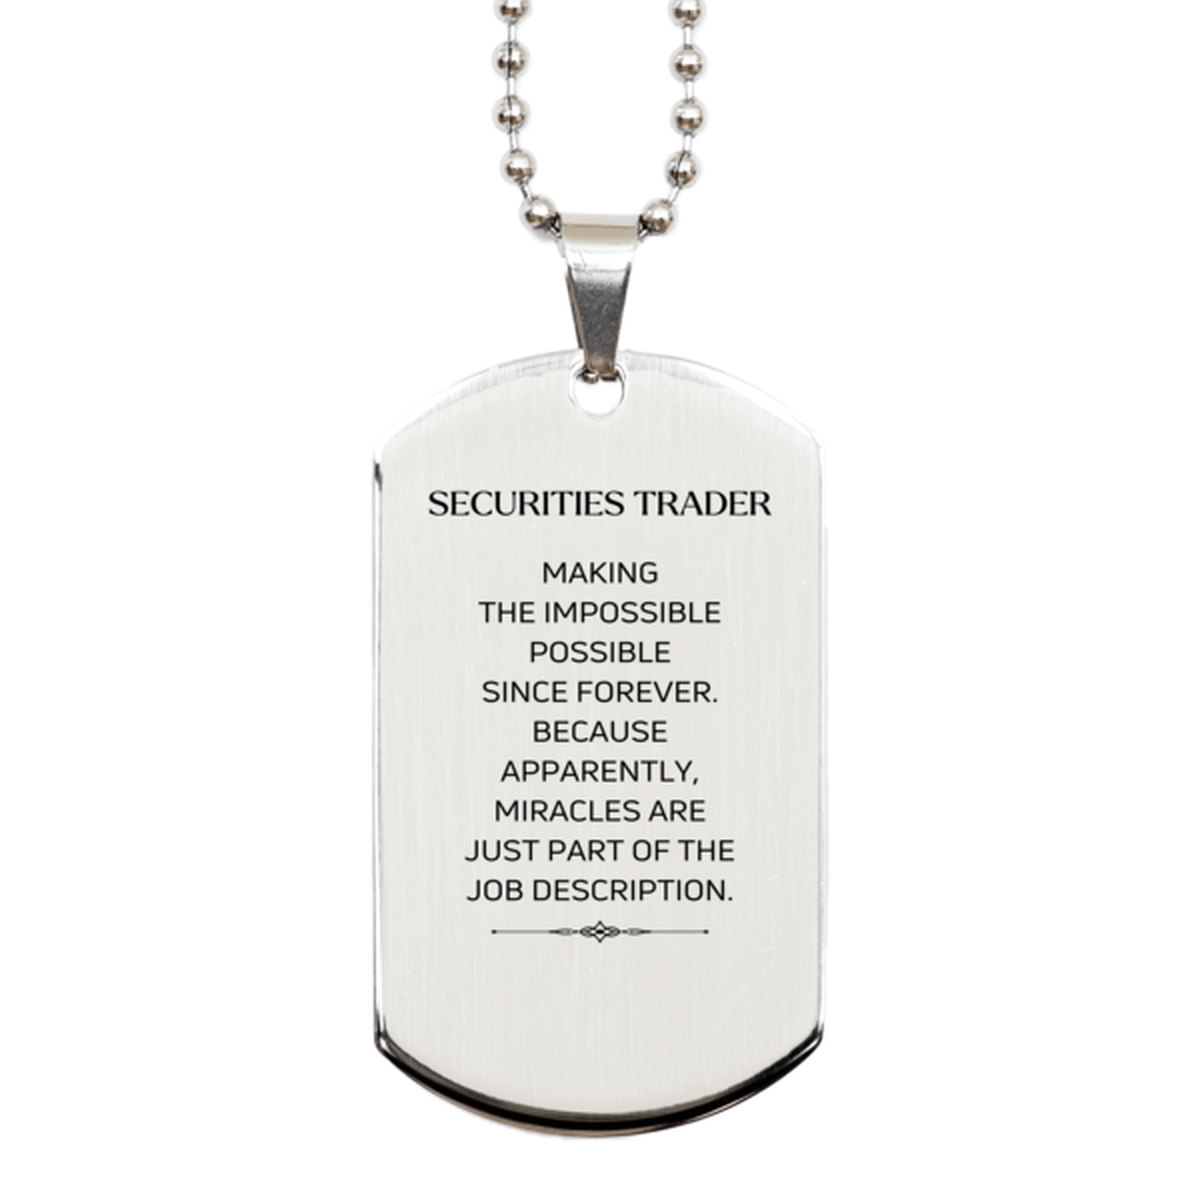 Funny Securities Trader Gifts, Miracles are just part of the job description, Inspirational Birthday Silver Dog Tag For Securities Trader, Men, Women, Coworkers, Friends, Boss